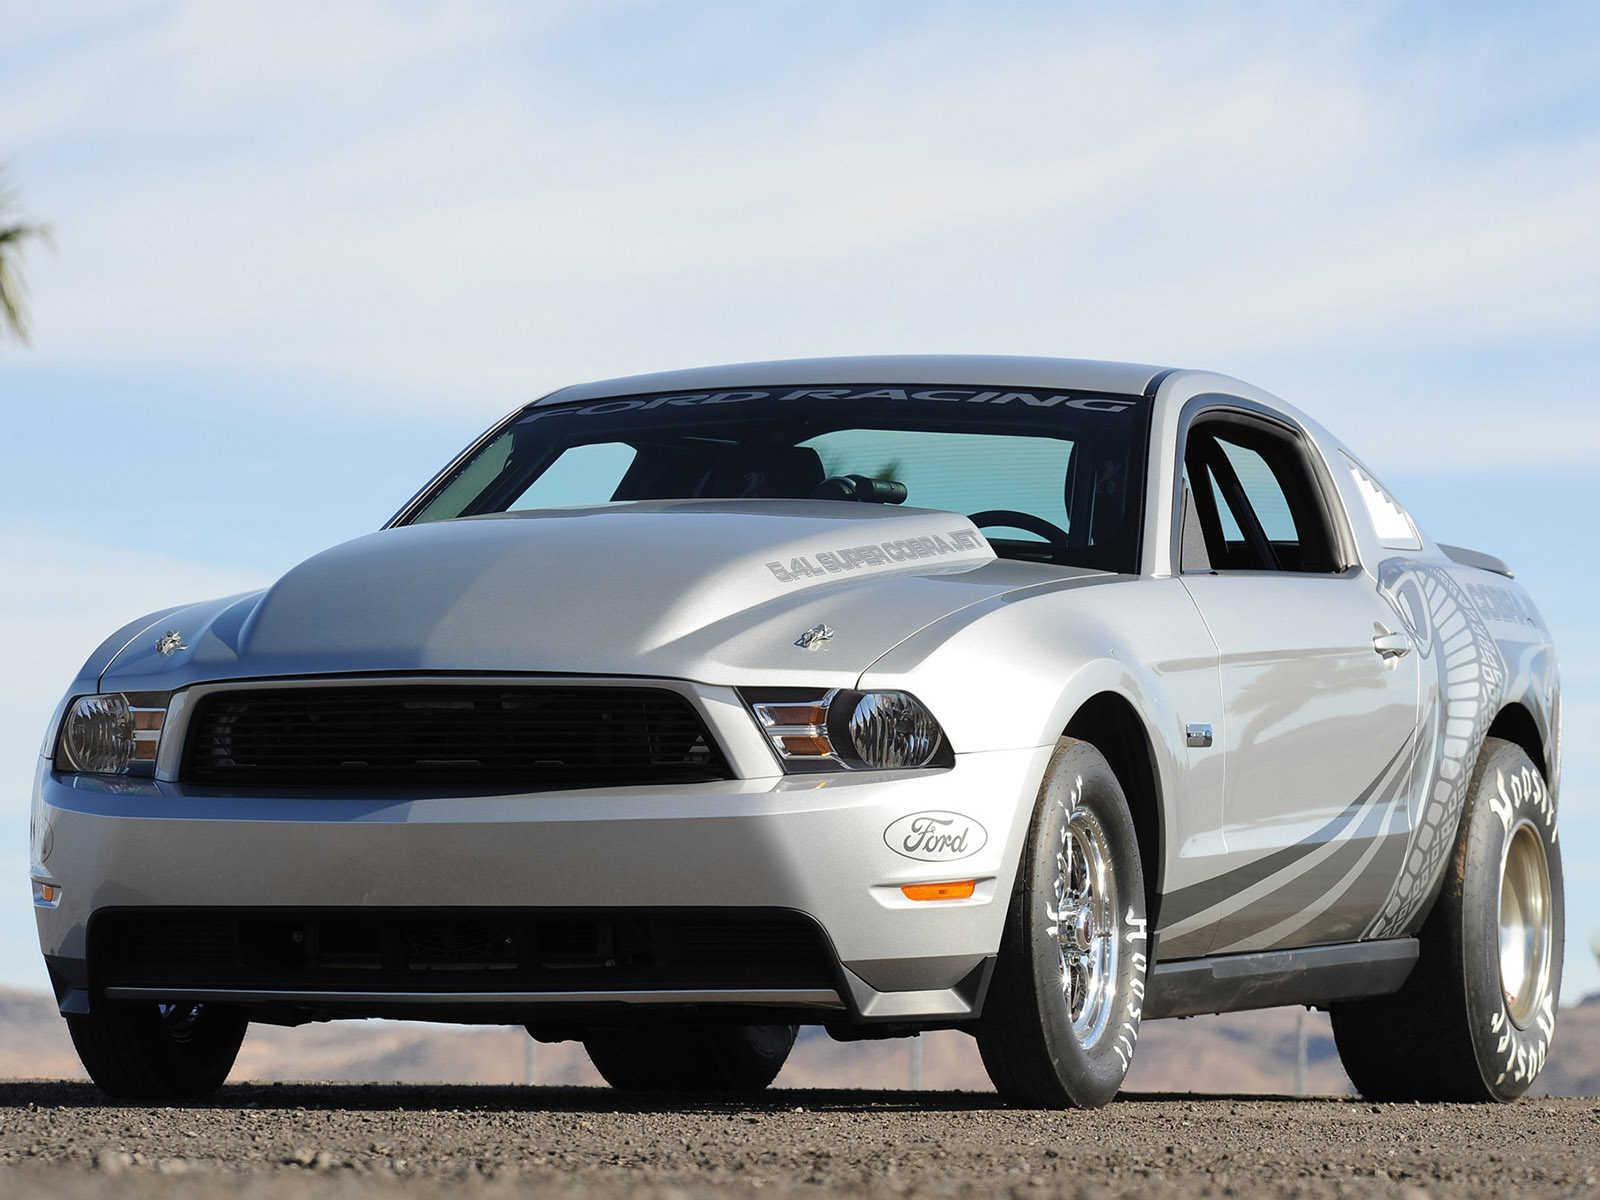 2012, Ford, Mustang, Cobra, Jet, Muscle, Hot, Rod, Rods, Drag, Racing, Race Wallpaper